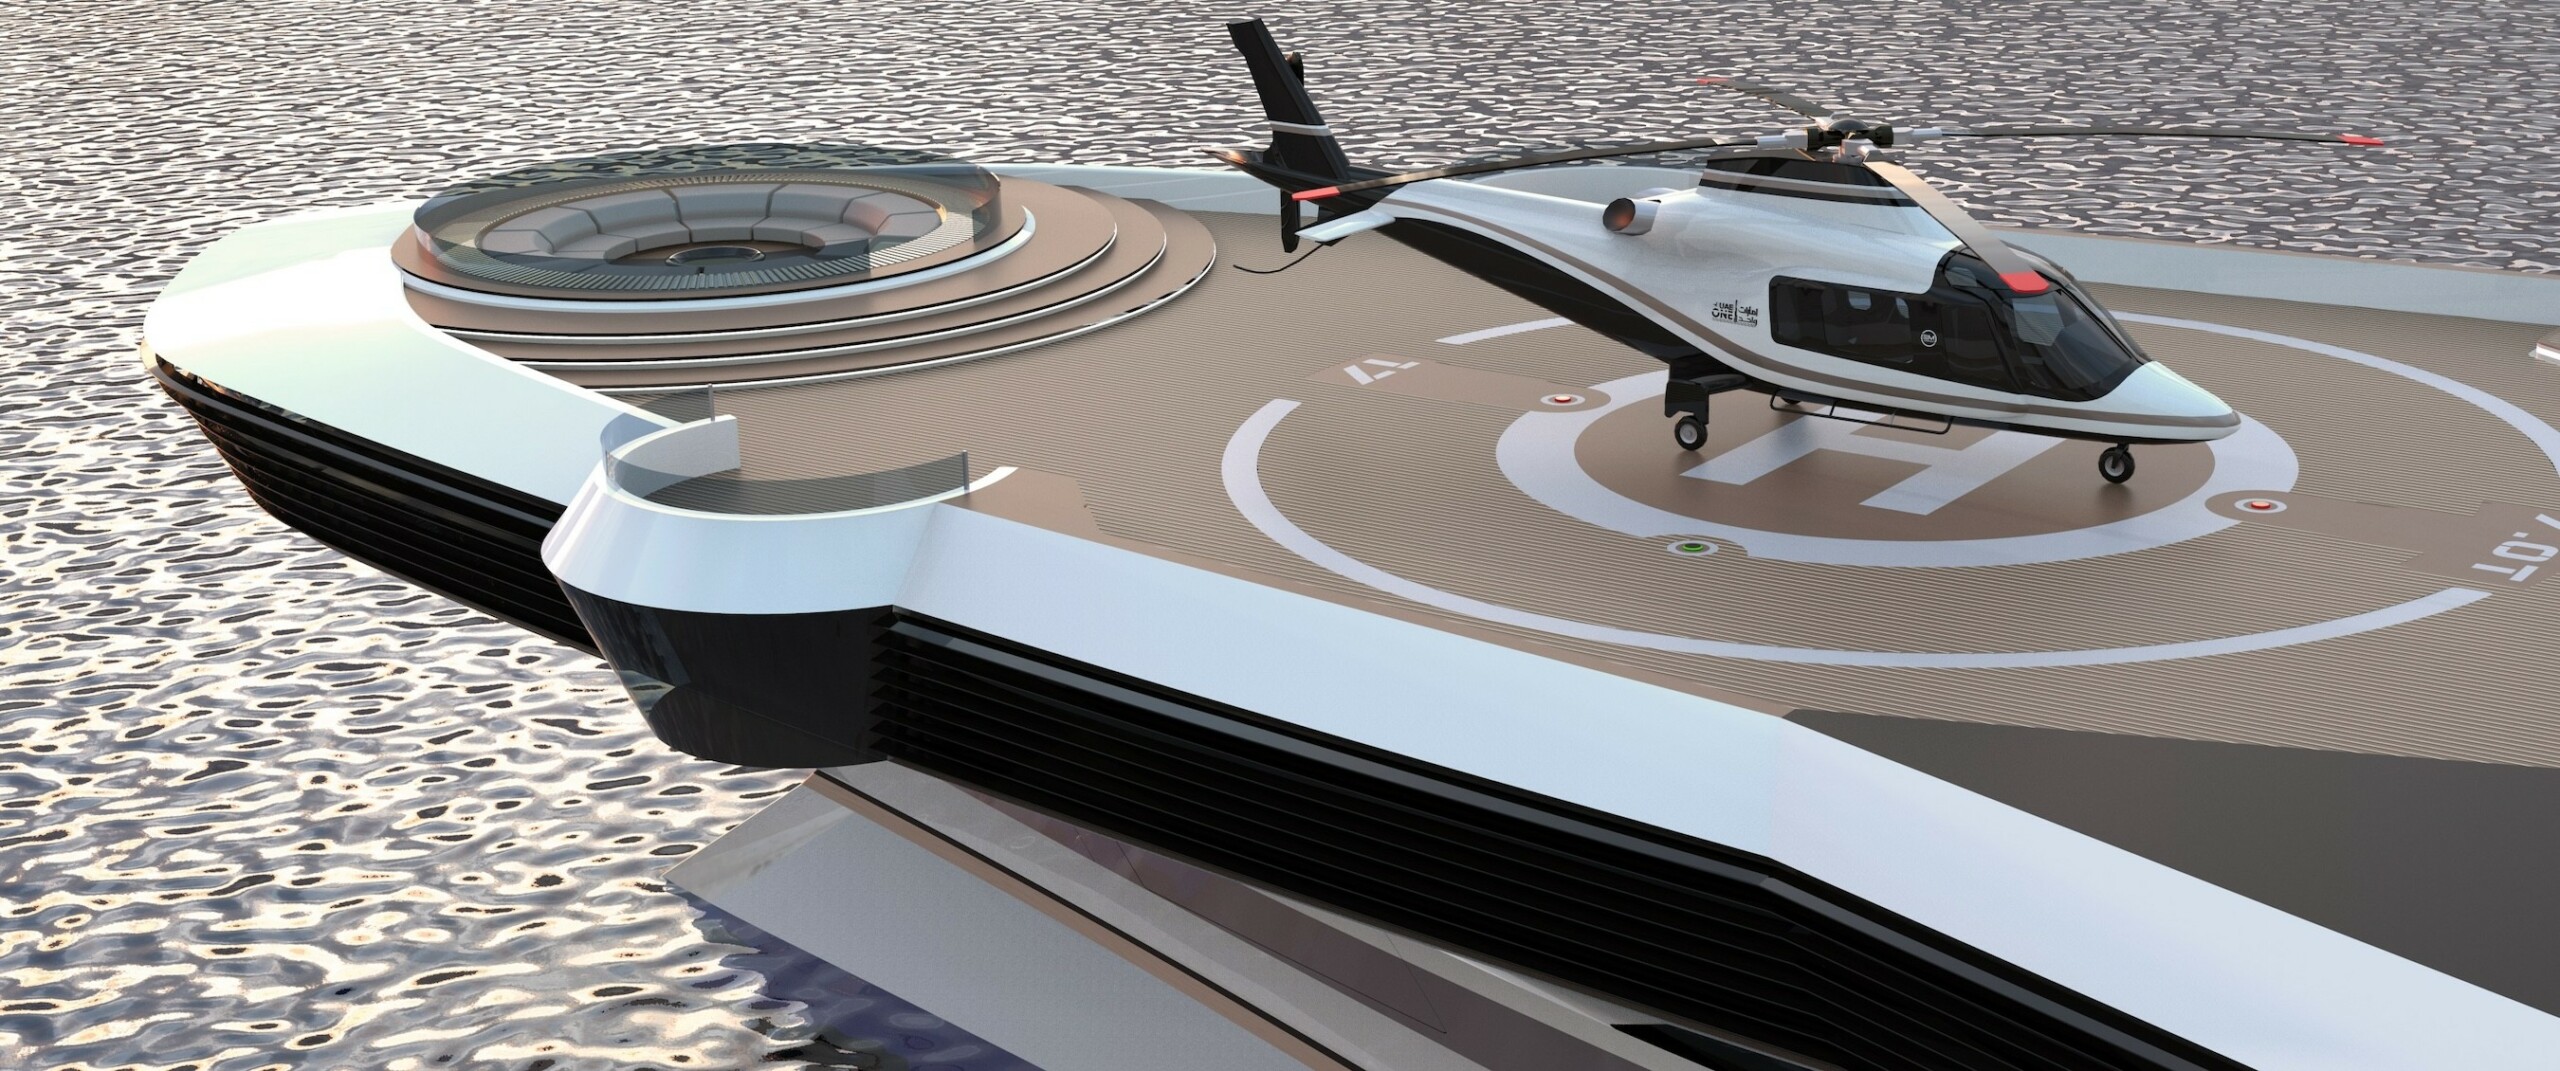 us aircraft carrier inspired uae one megayacht is so big it could be its own country 3 scaled